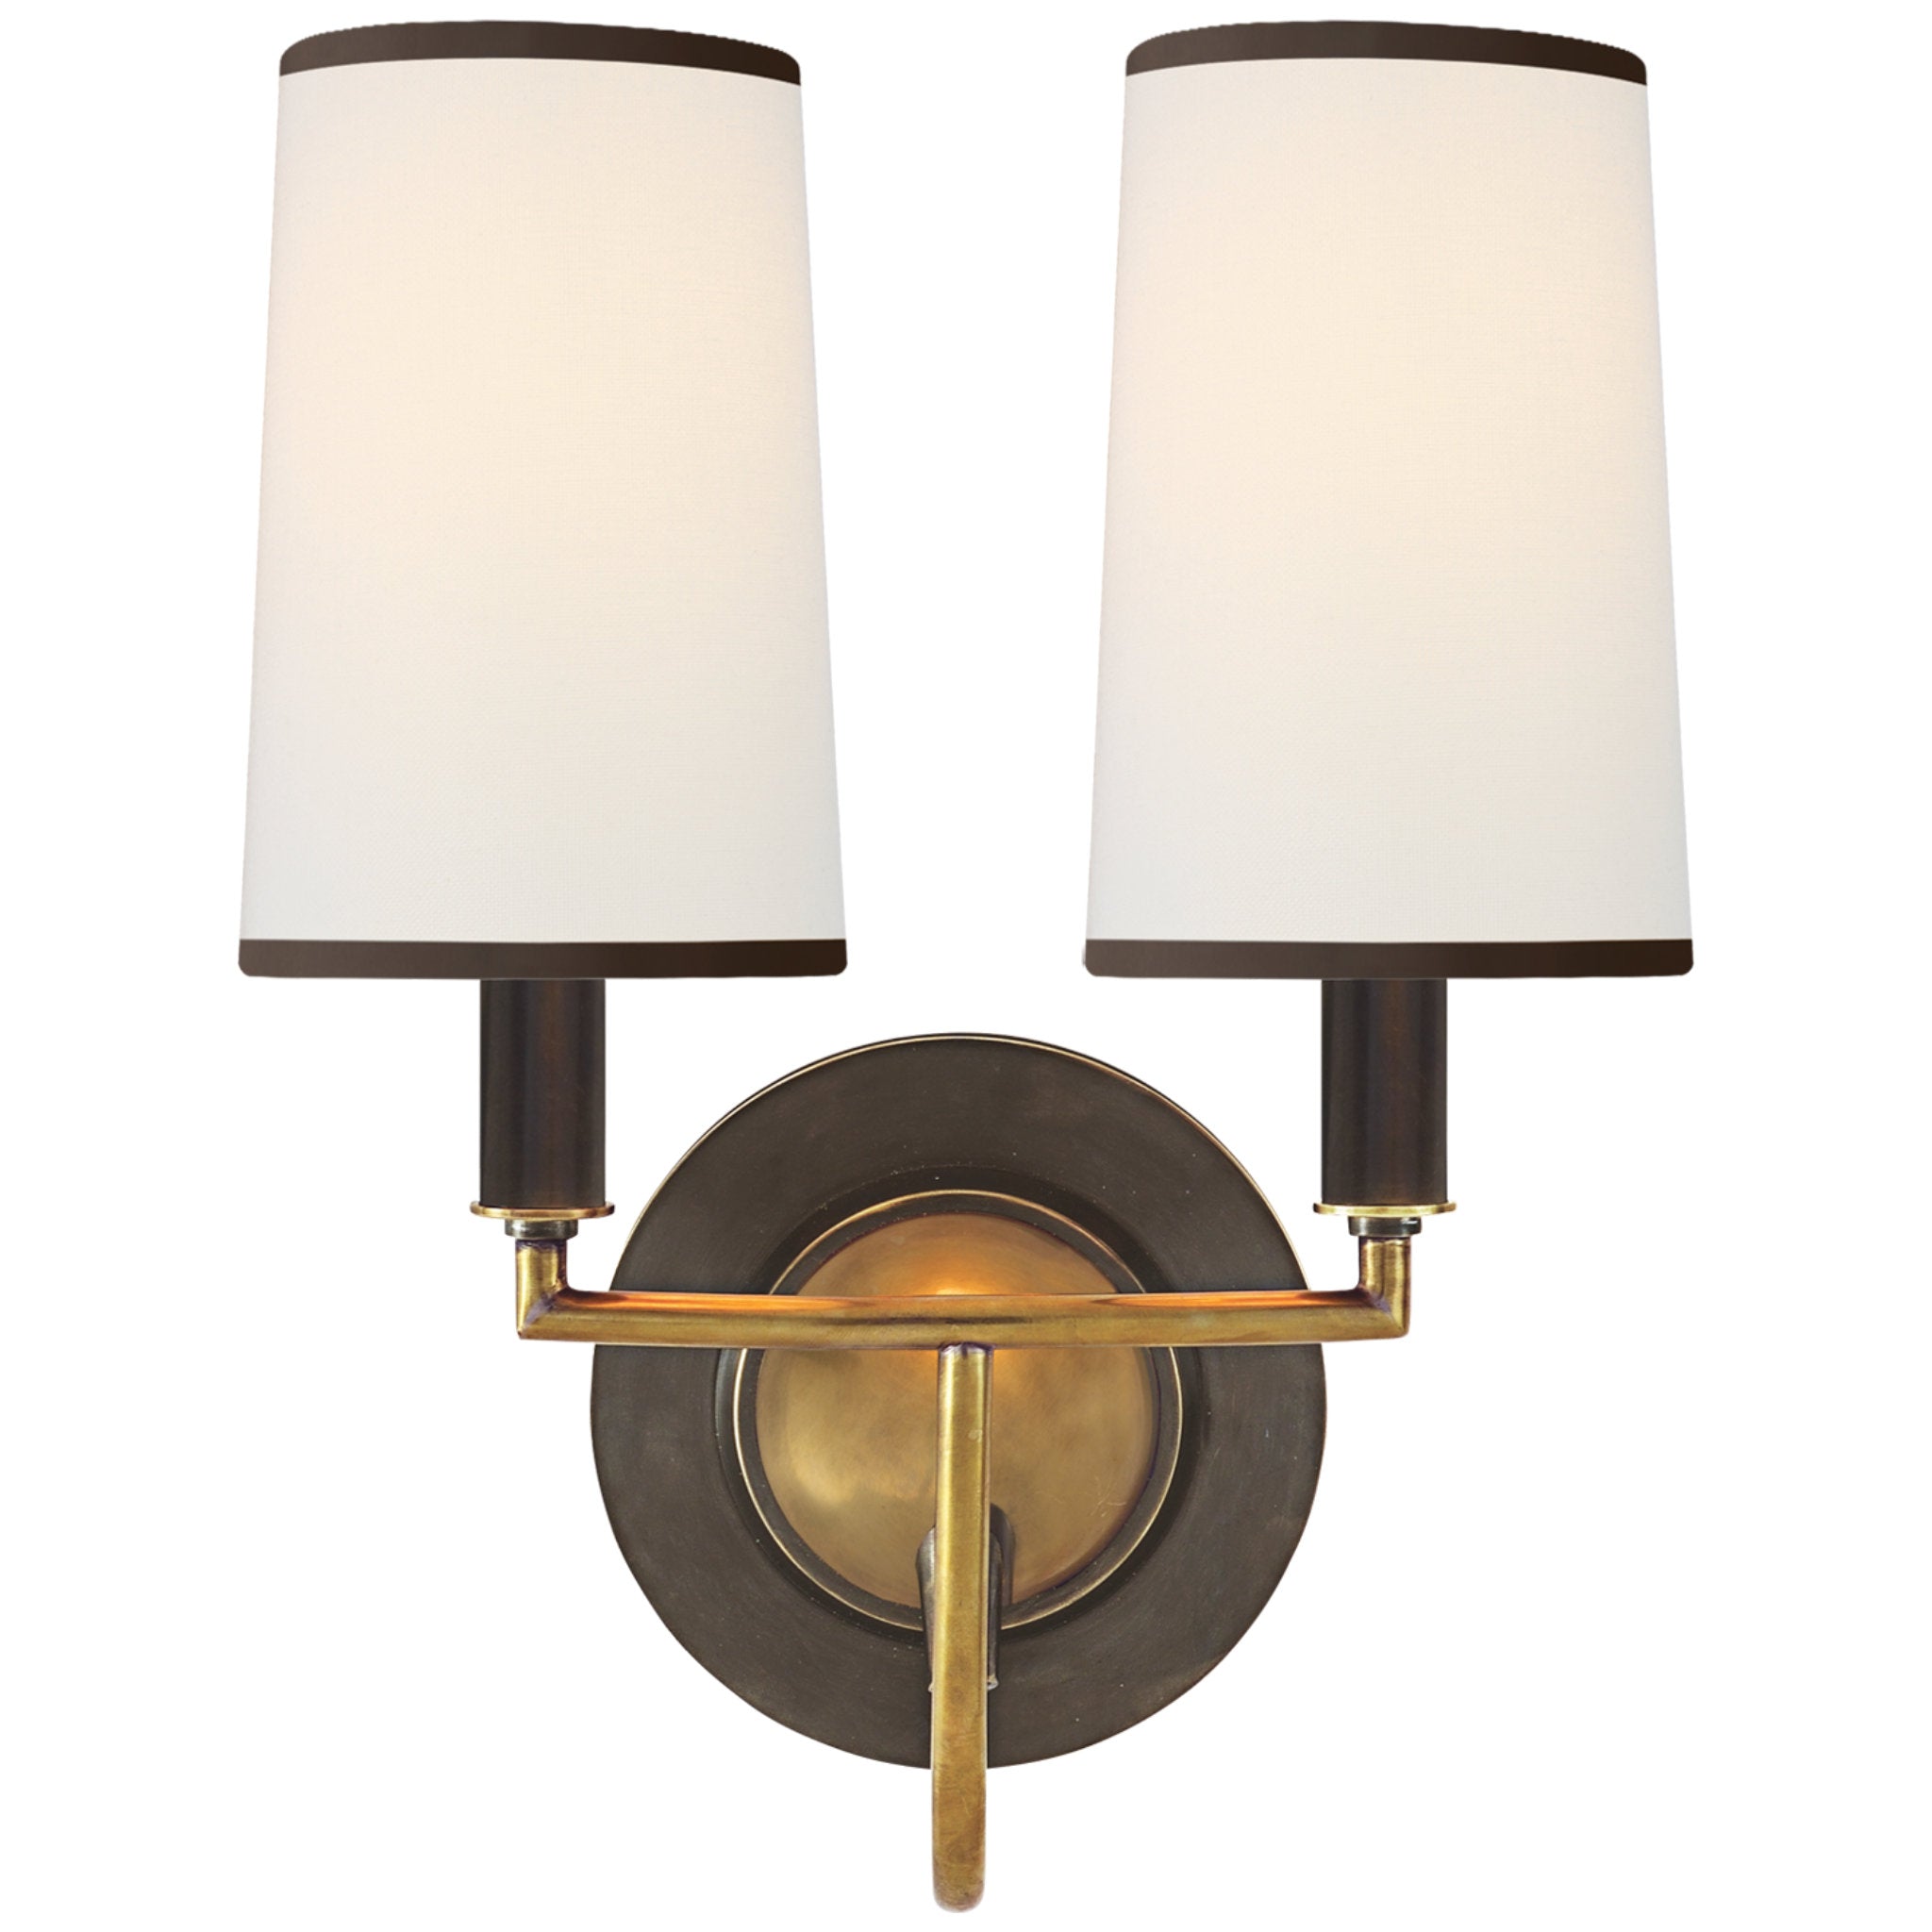 Thomas O'Brien Elkins Double Sconce in Bronze and Hand-Rubbed Antique Brass with Linen Shades with Black Trim